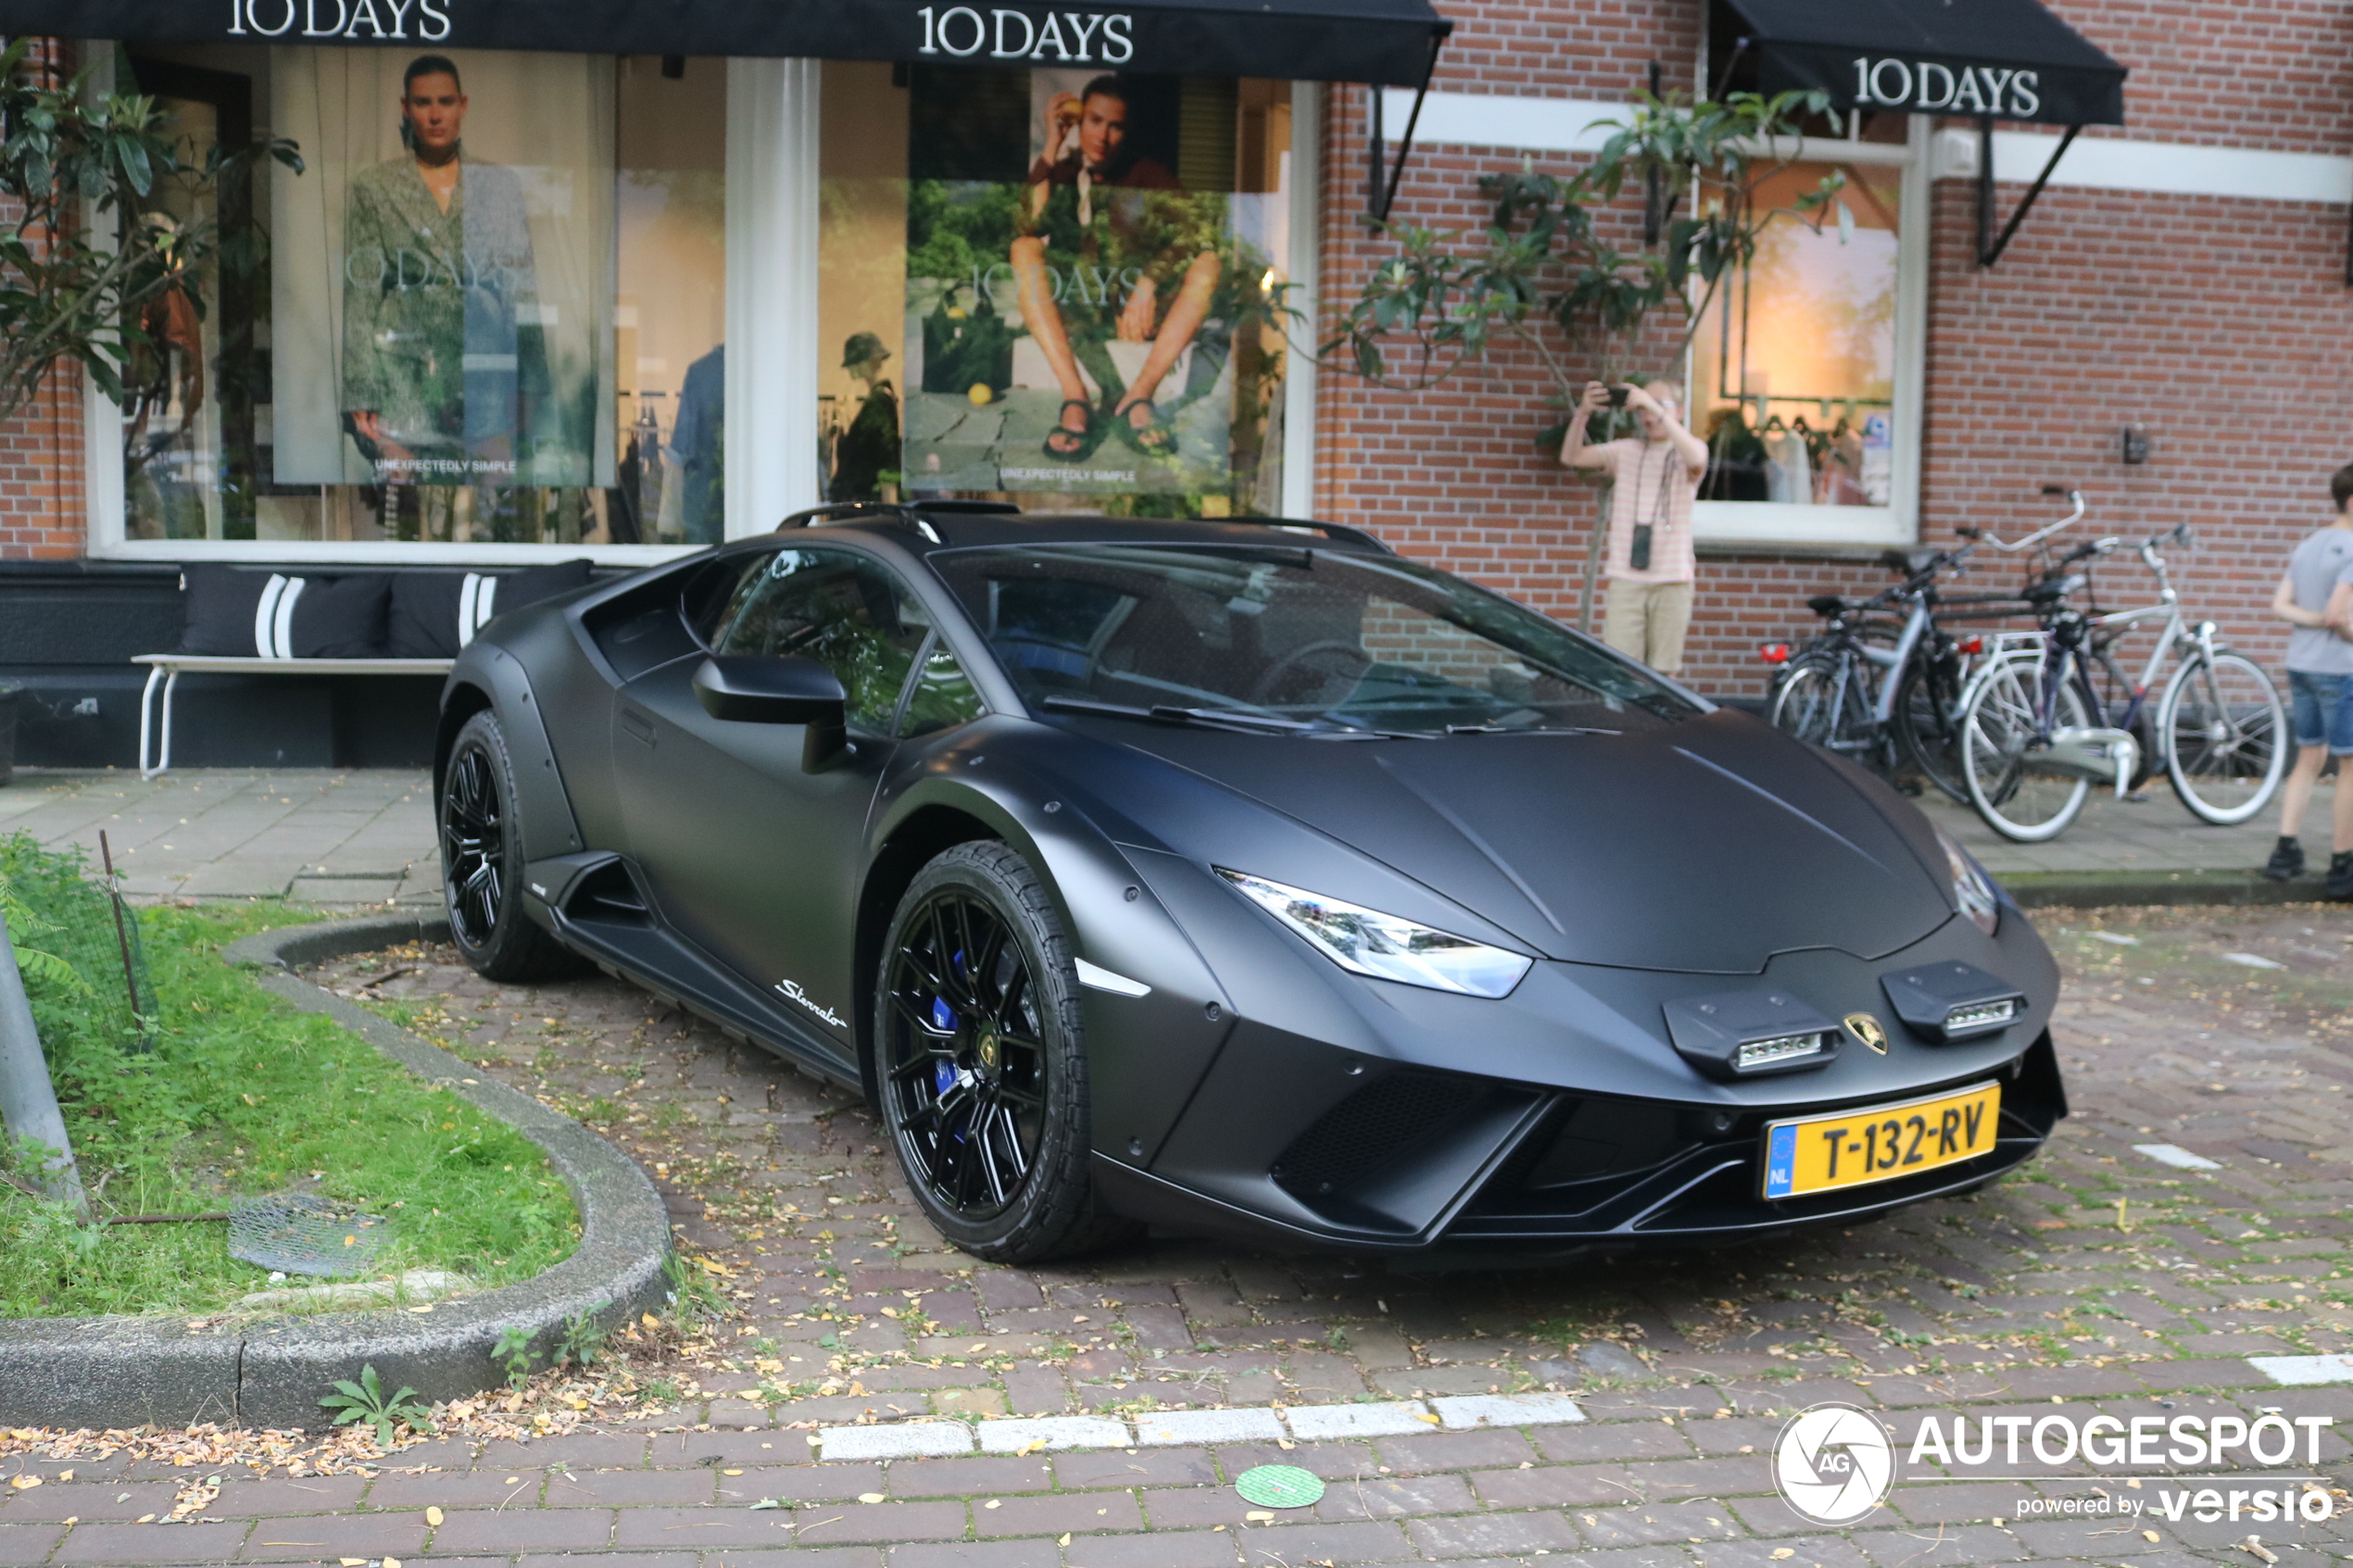 A Huracán LP610-4 Sterrato shows up in Amsterdam